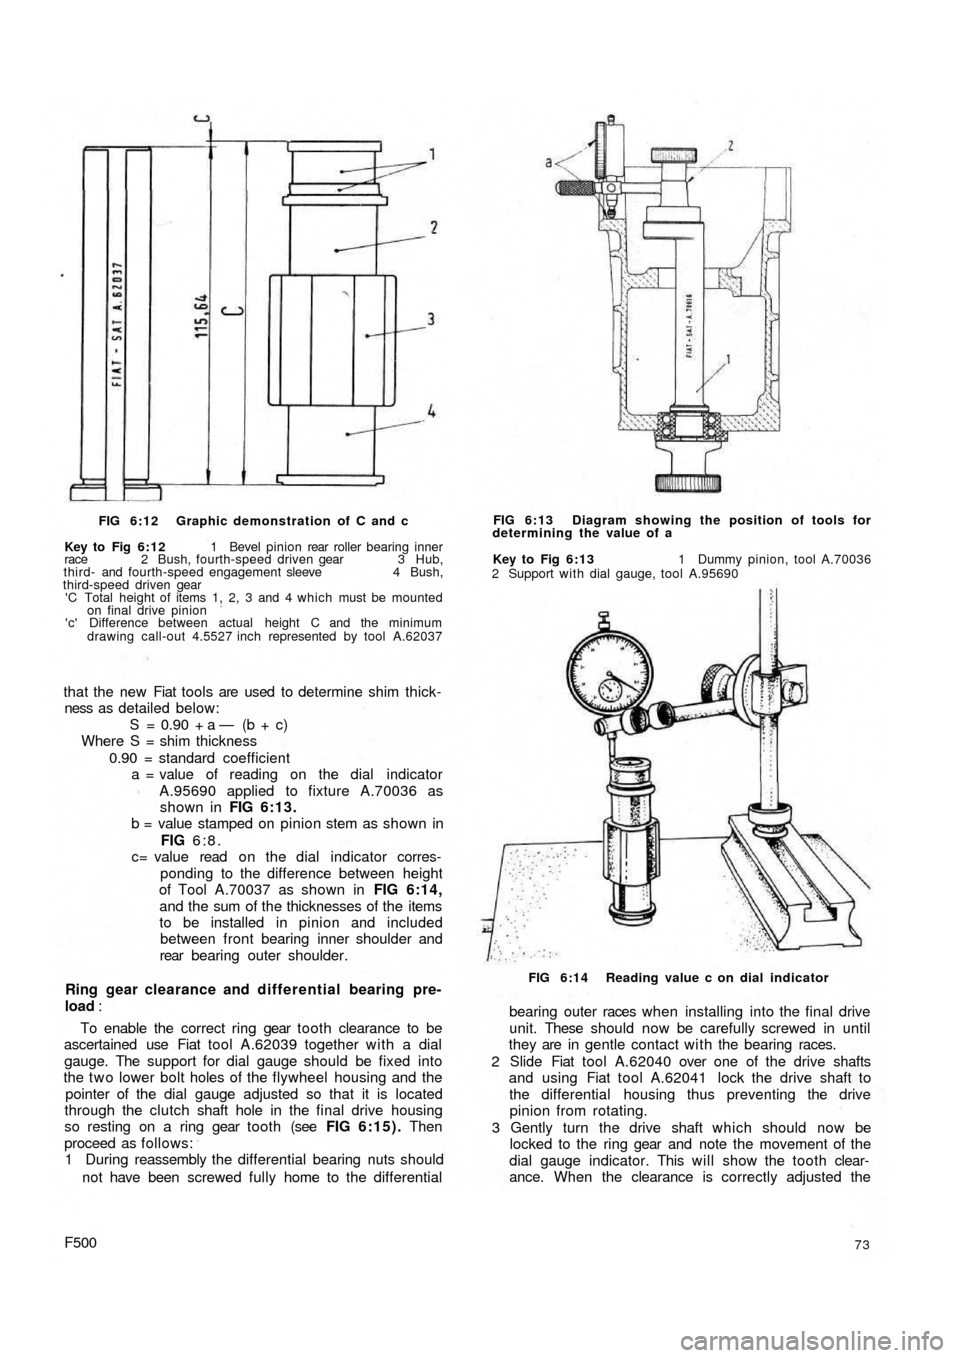 FIAT 500 1973 1.G Workshop Manual FIG 6:12 Graphic demonstration  of C and c
Key to Fig 6:12 1 Bevel pinion rear roller bearing inner
race 2 Bush, fourth-speed driven gear 3 Hub,
third- and fourth-speed engagement sleeve 4 Bush,
third